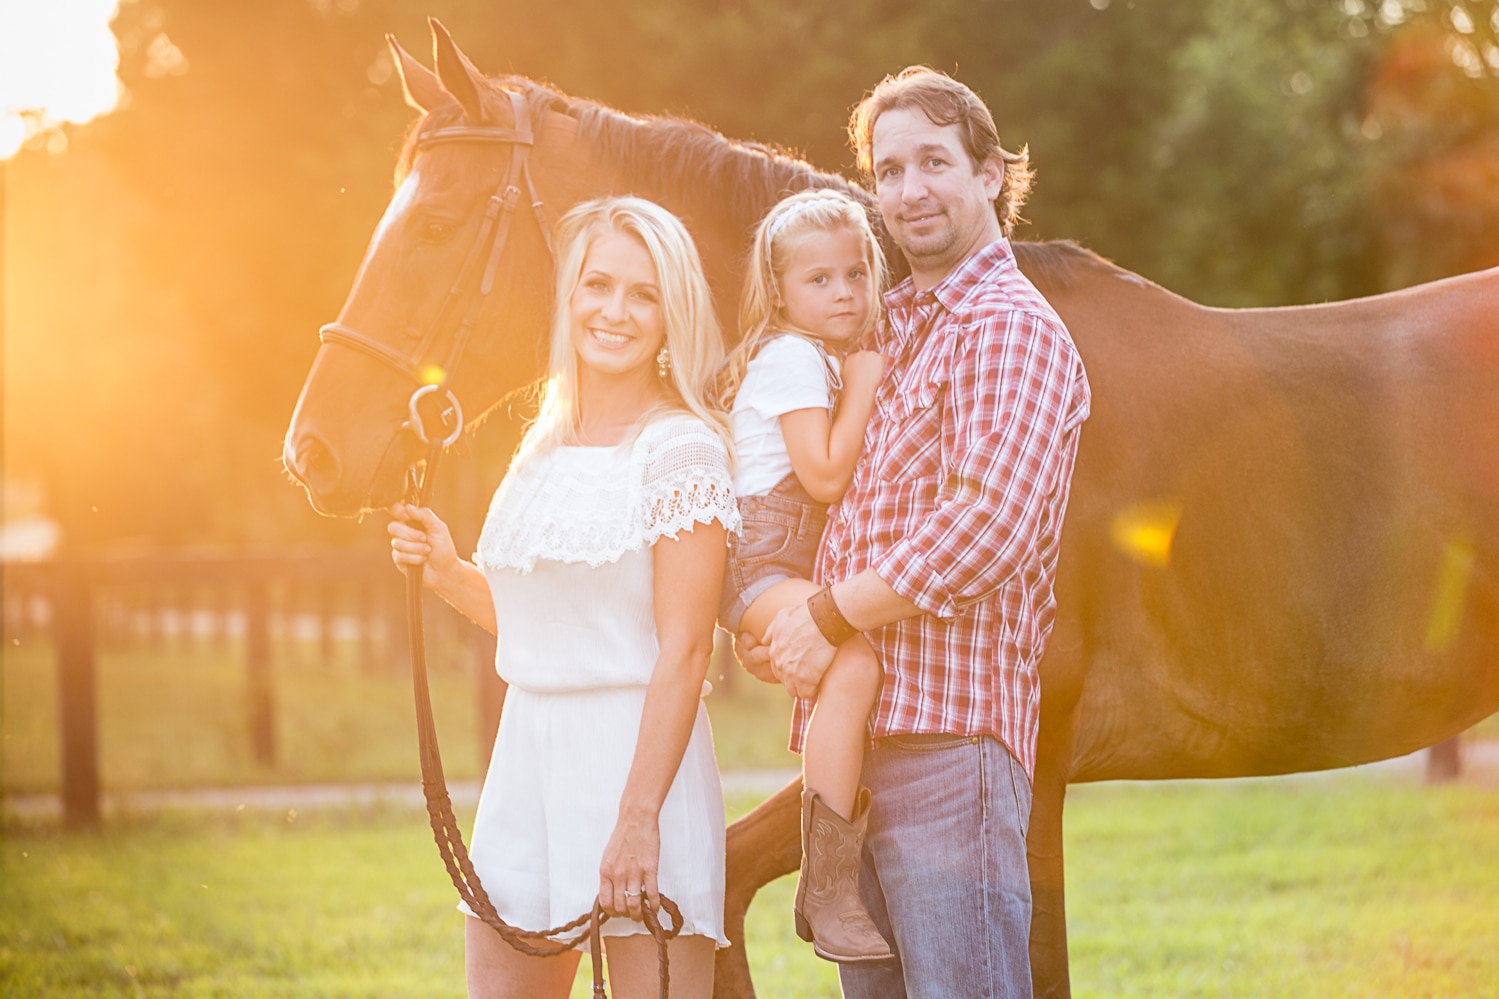 Tennesse Equine Photography